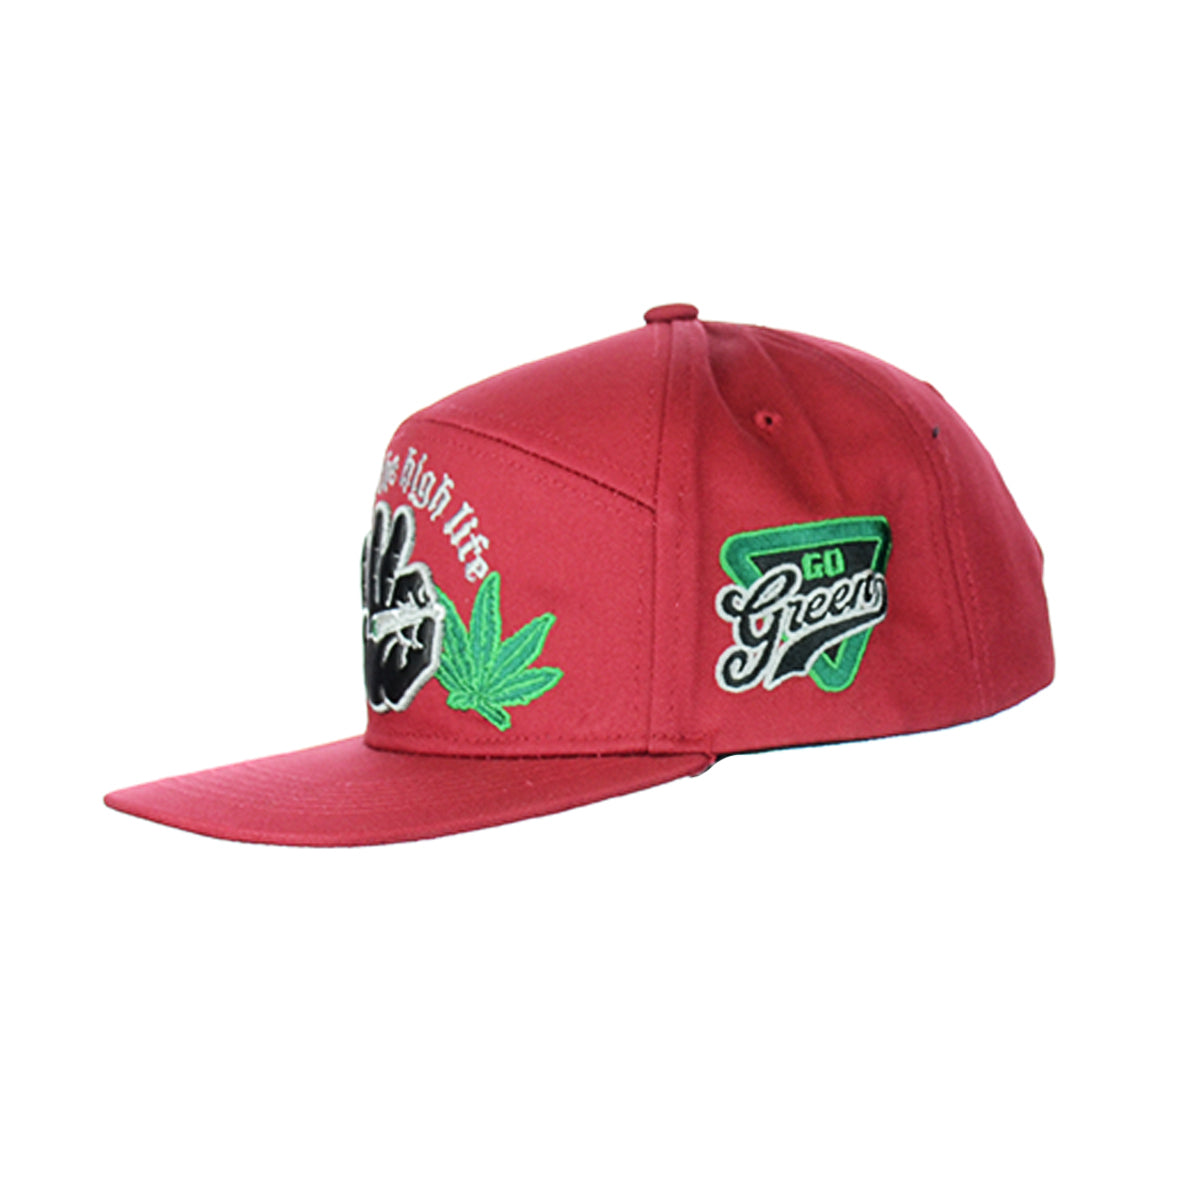 Livin The High Life Embroidered Snapback Hat